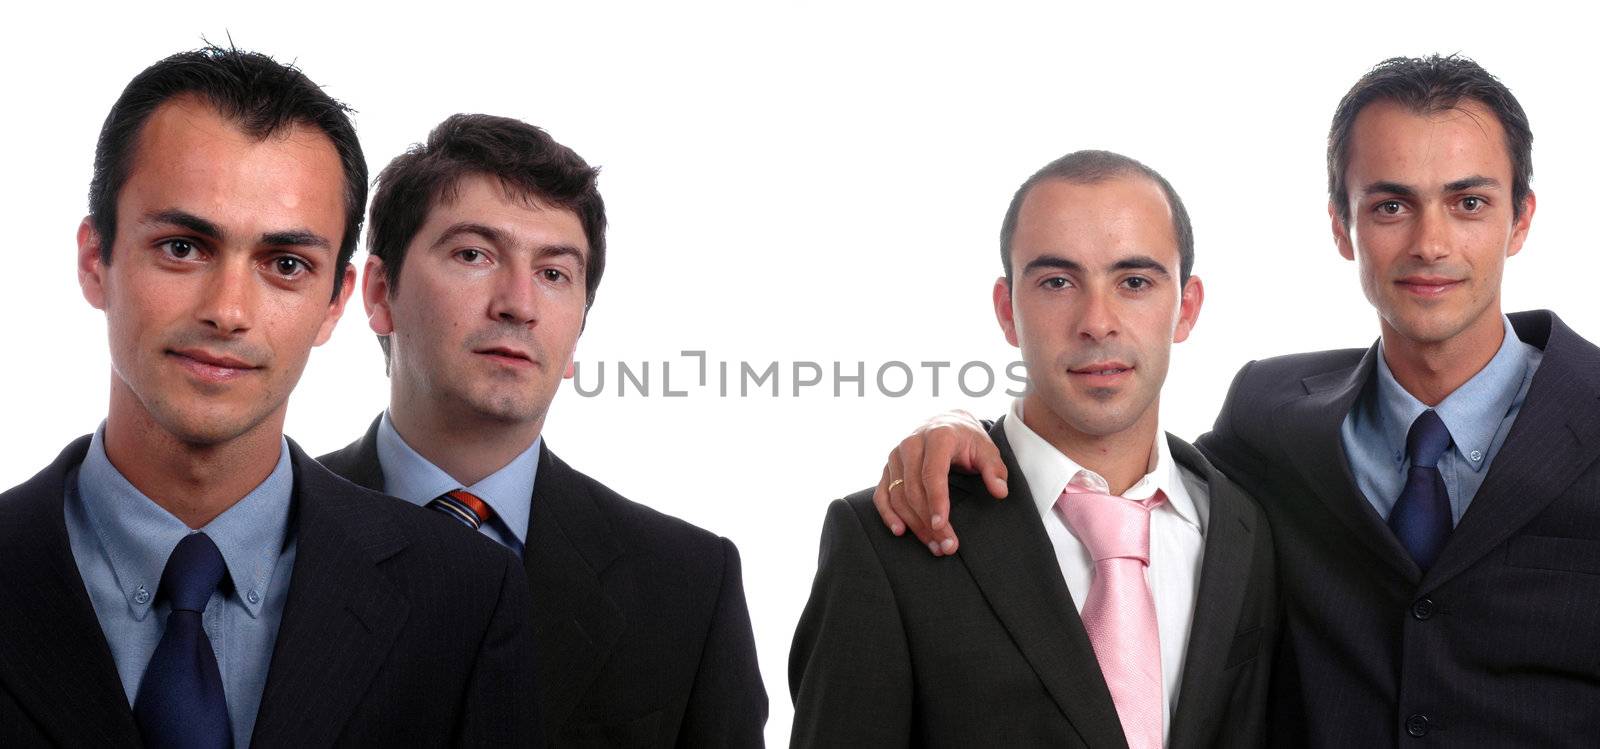 two young business men portrait on white by raalves